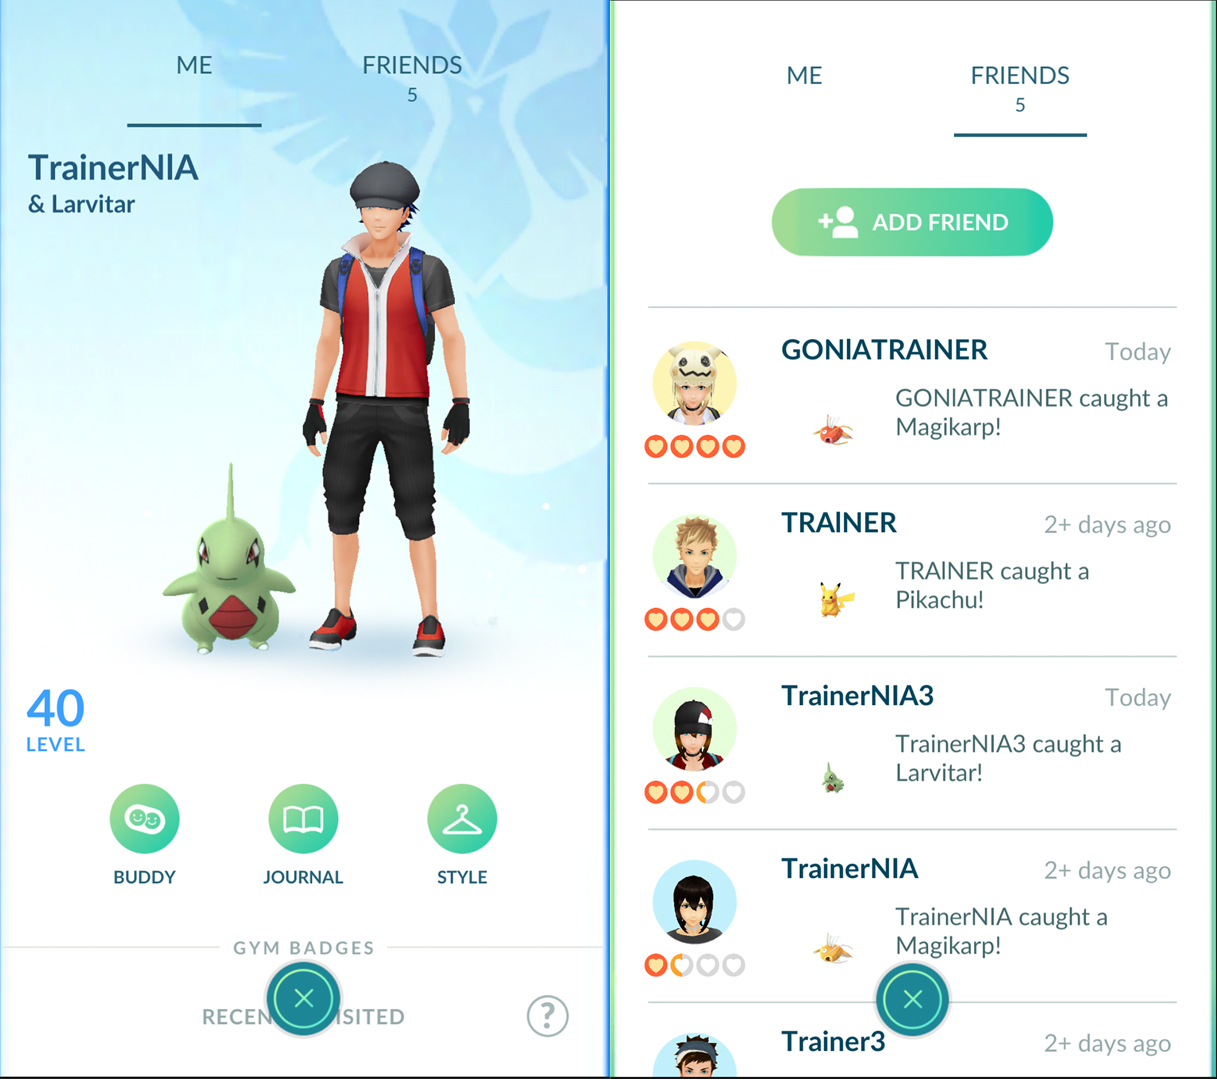 What's the maximum number of friends you can have in Pokémon GO